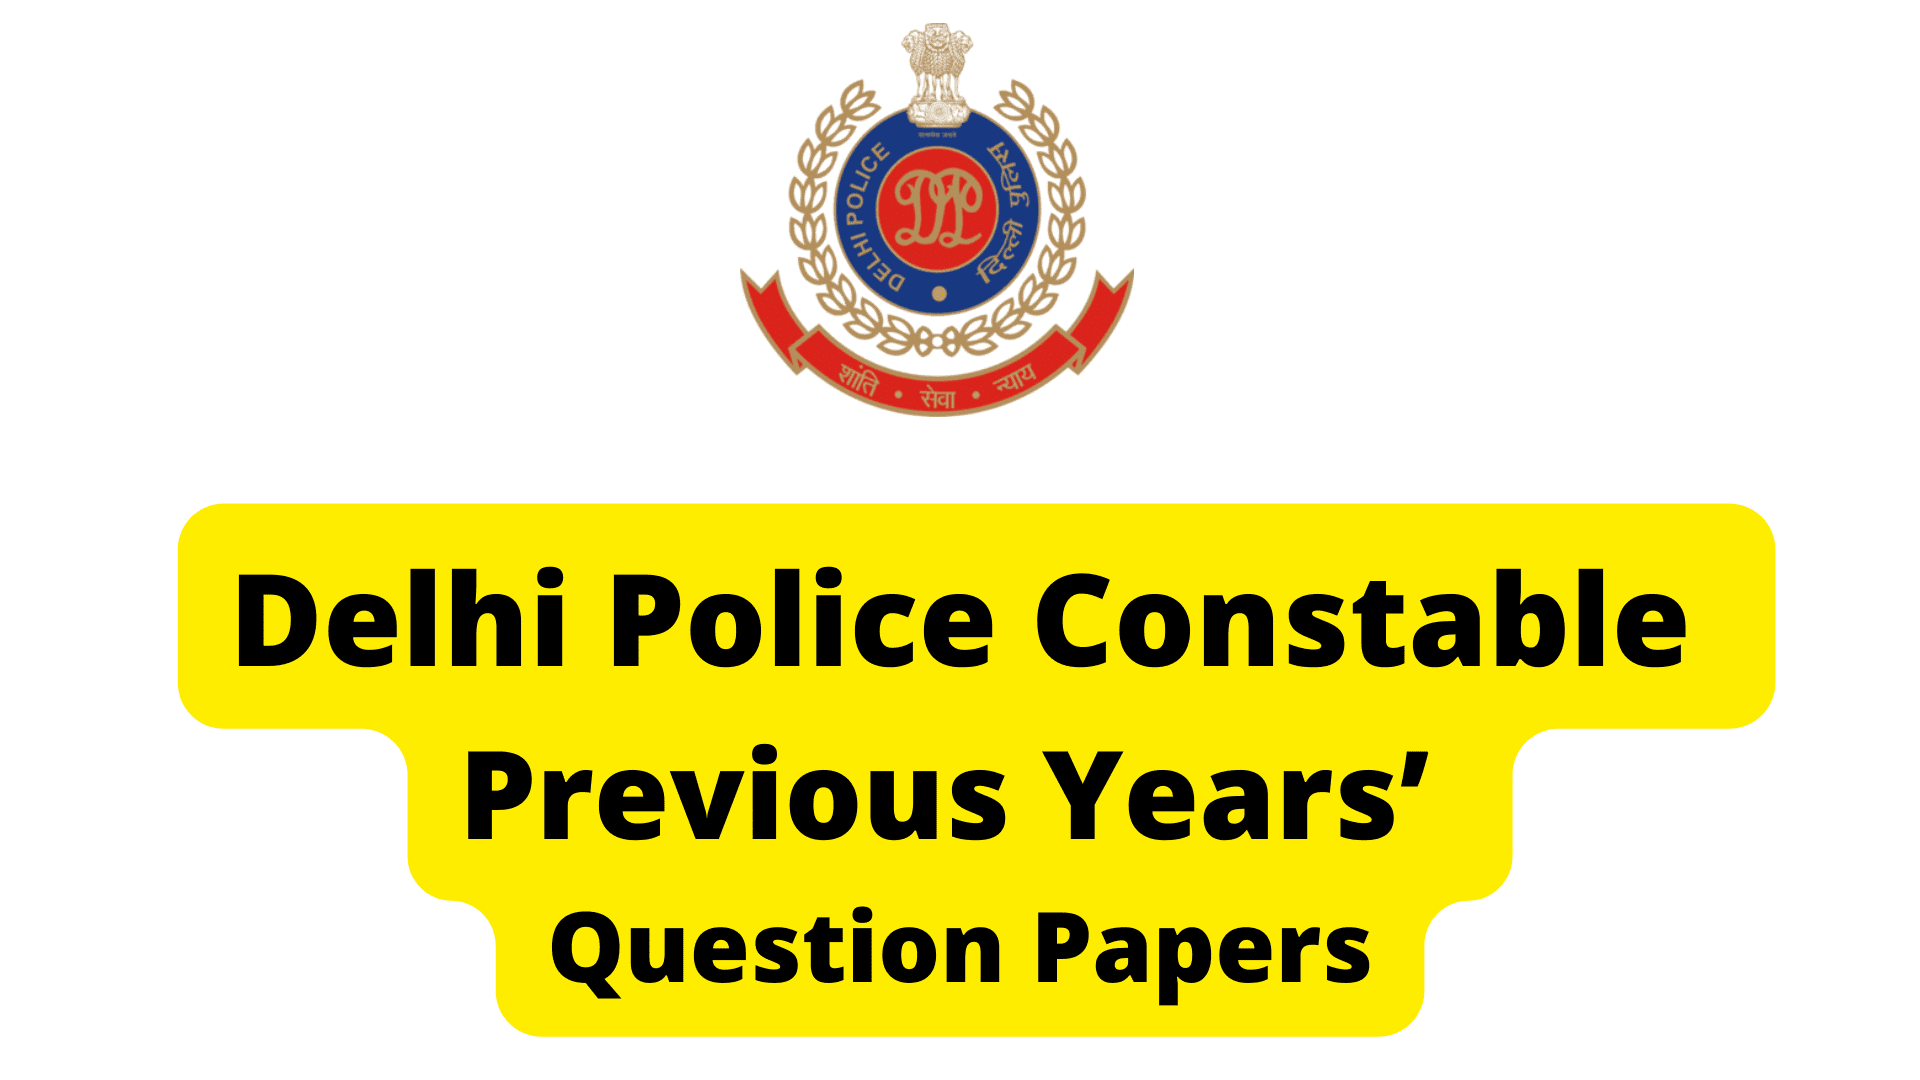 Delhi Police Constable Previous Years’ Question Papers